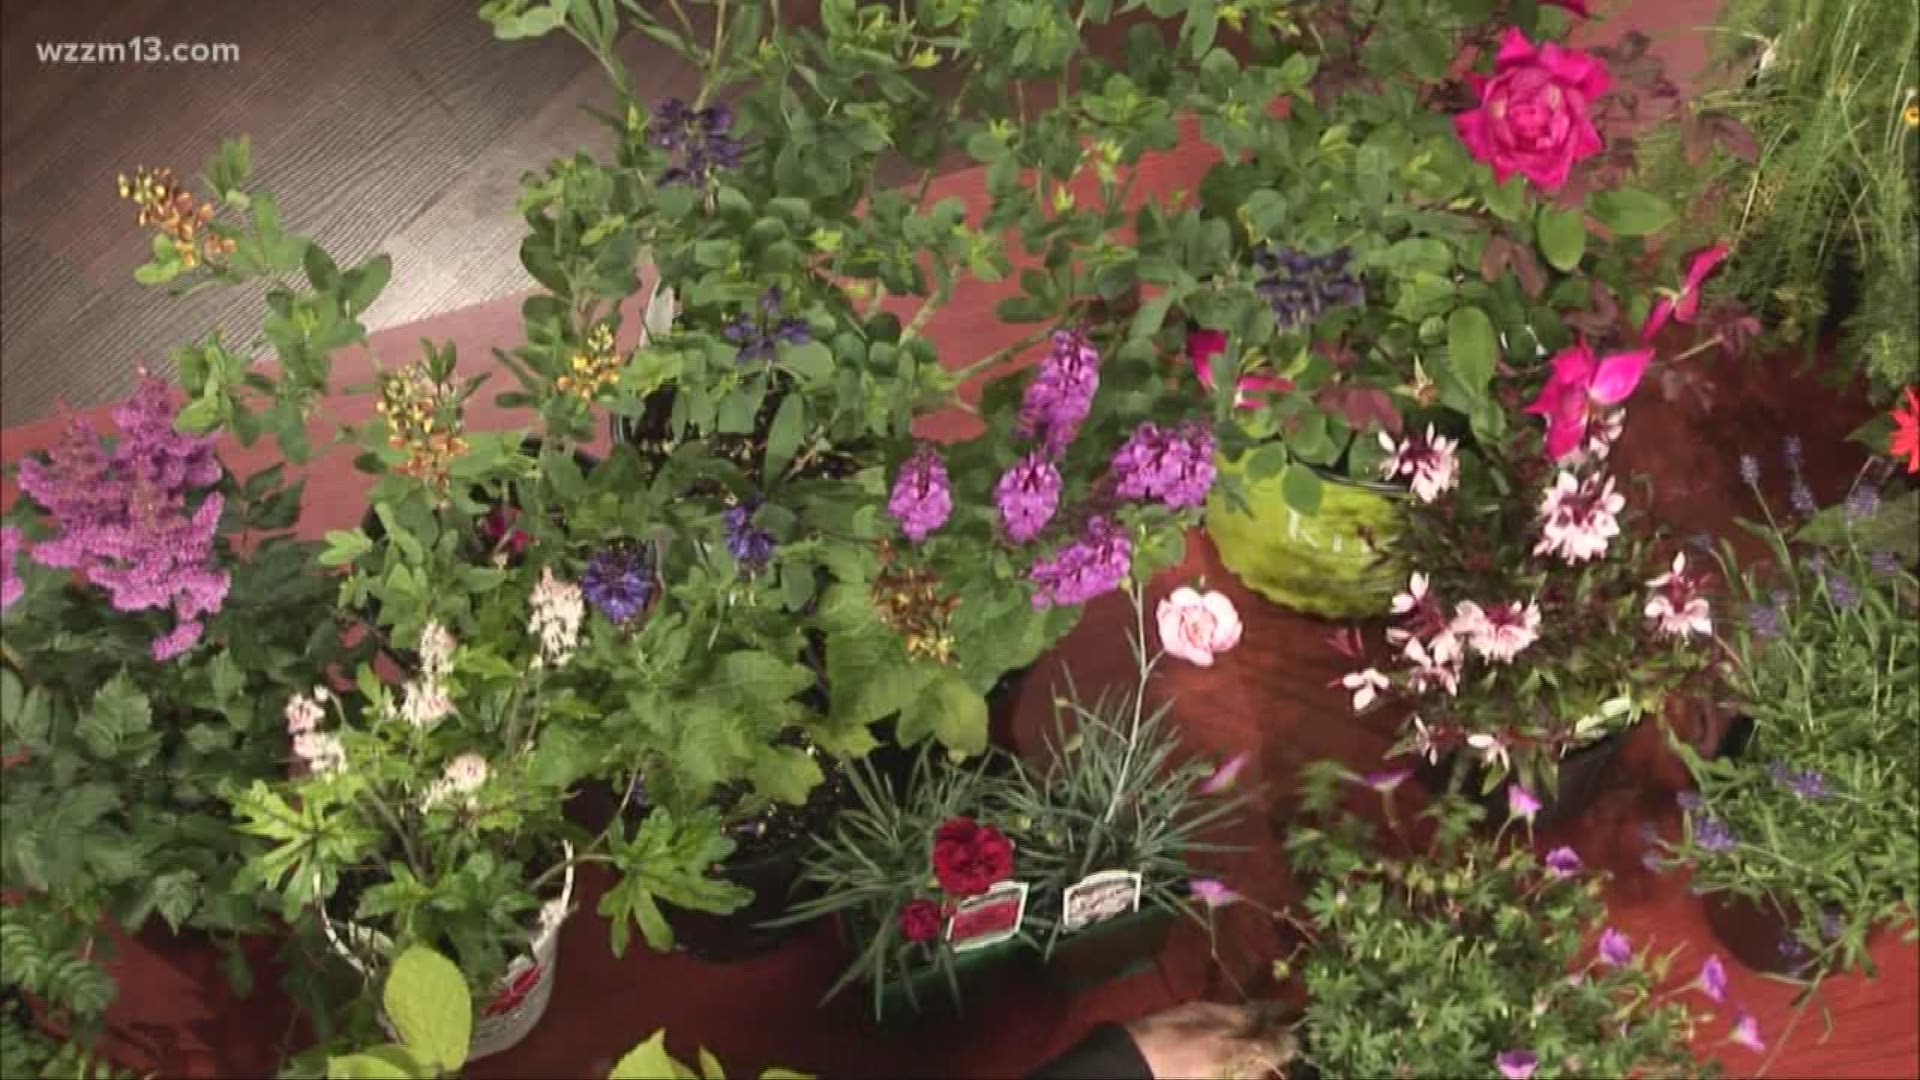 Plants That Keep Coming Back Year After Year Wzzm13 Com